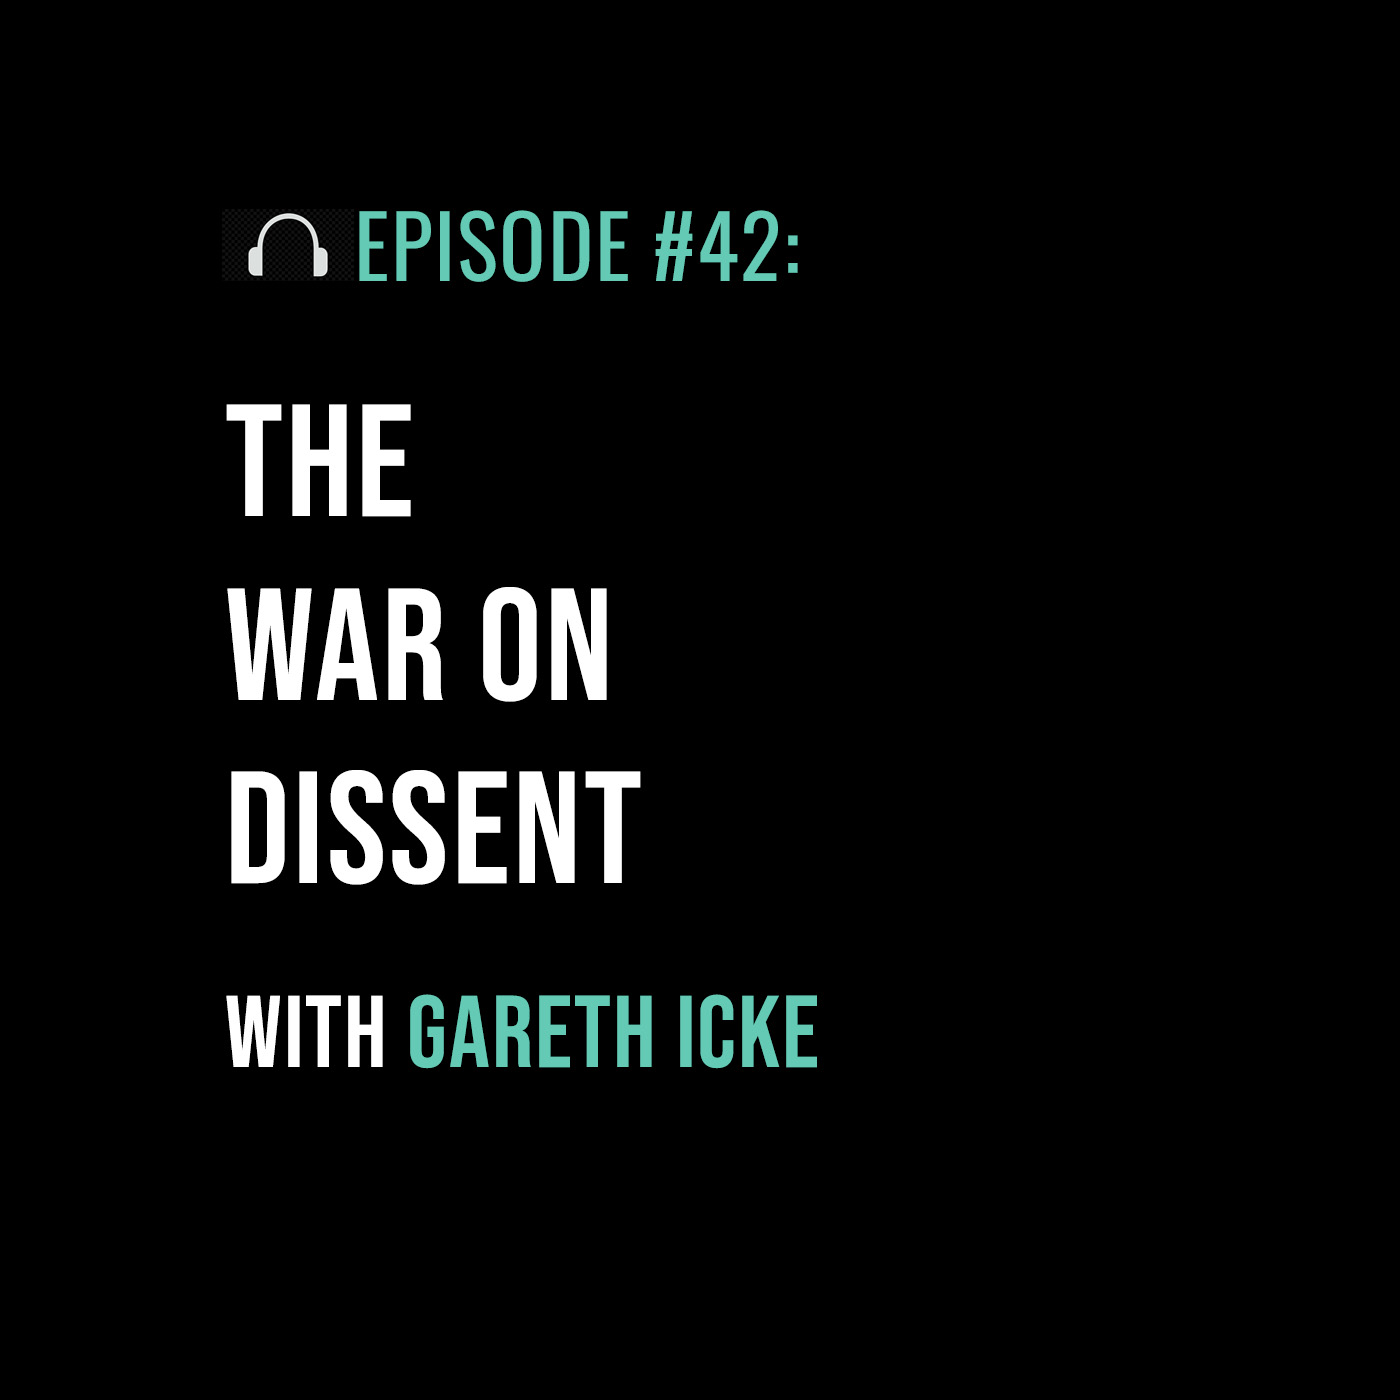 The War on Dissent with Gareth Icke